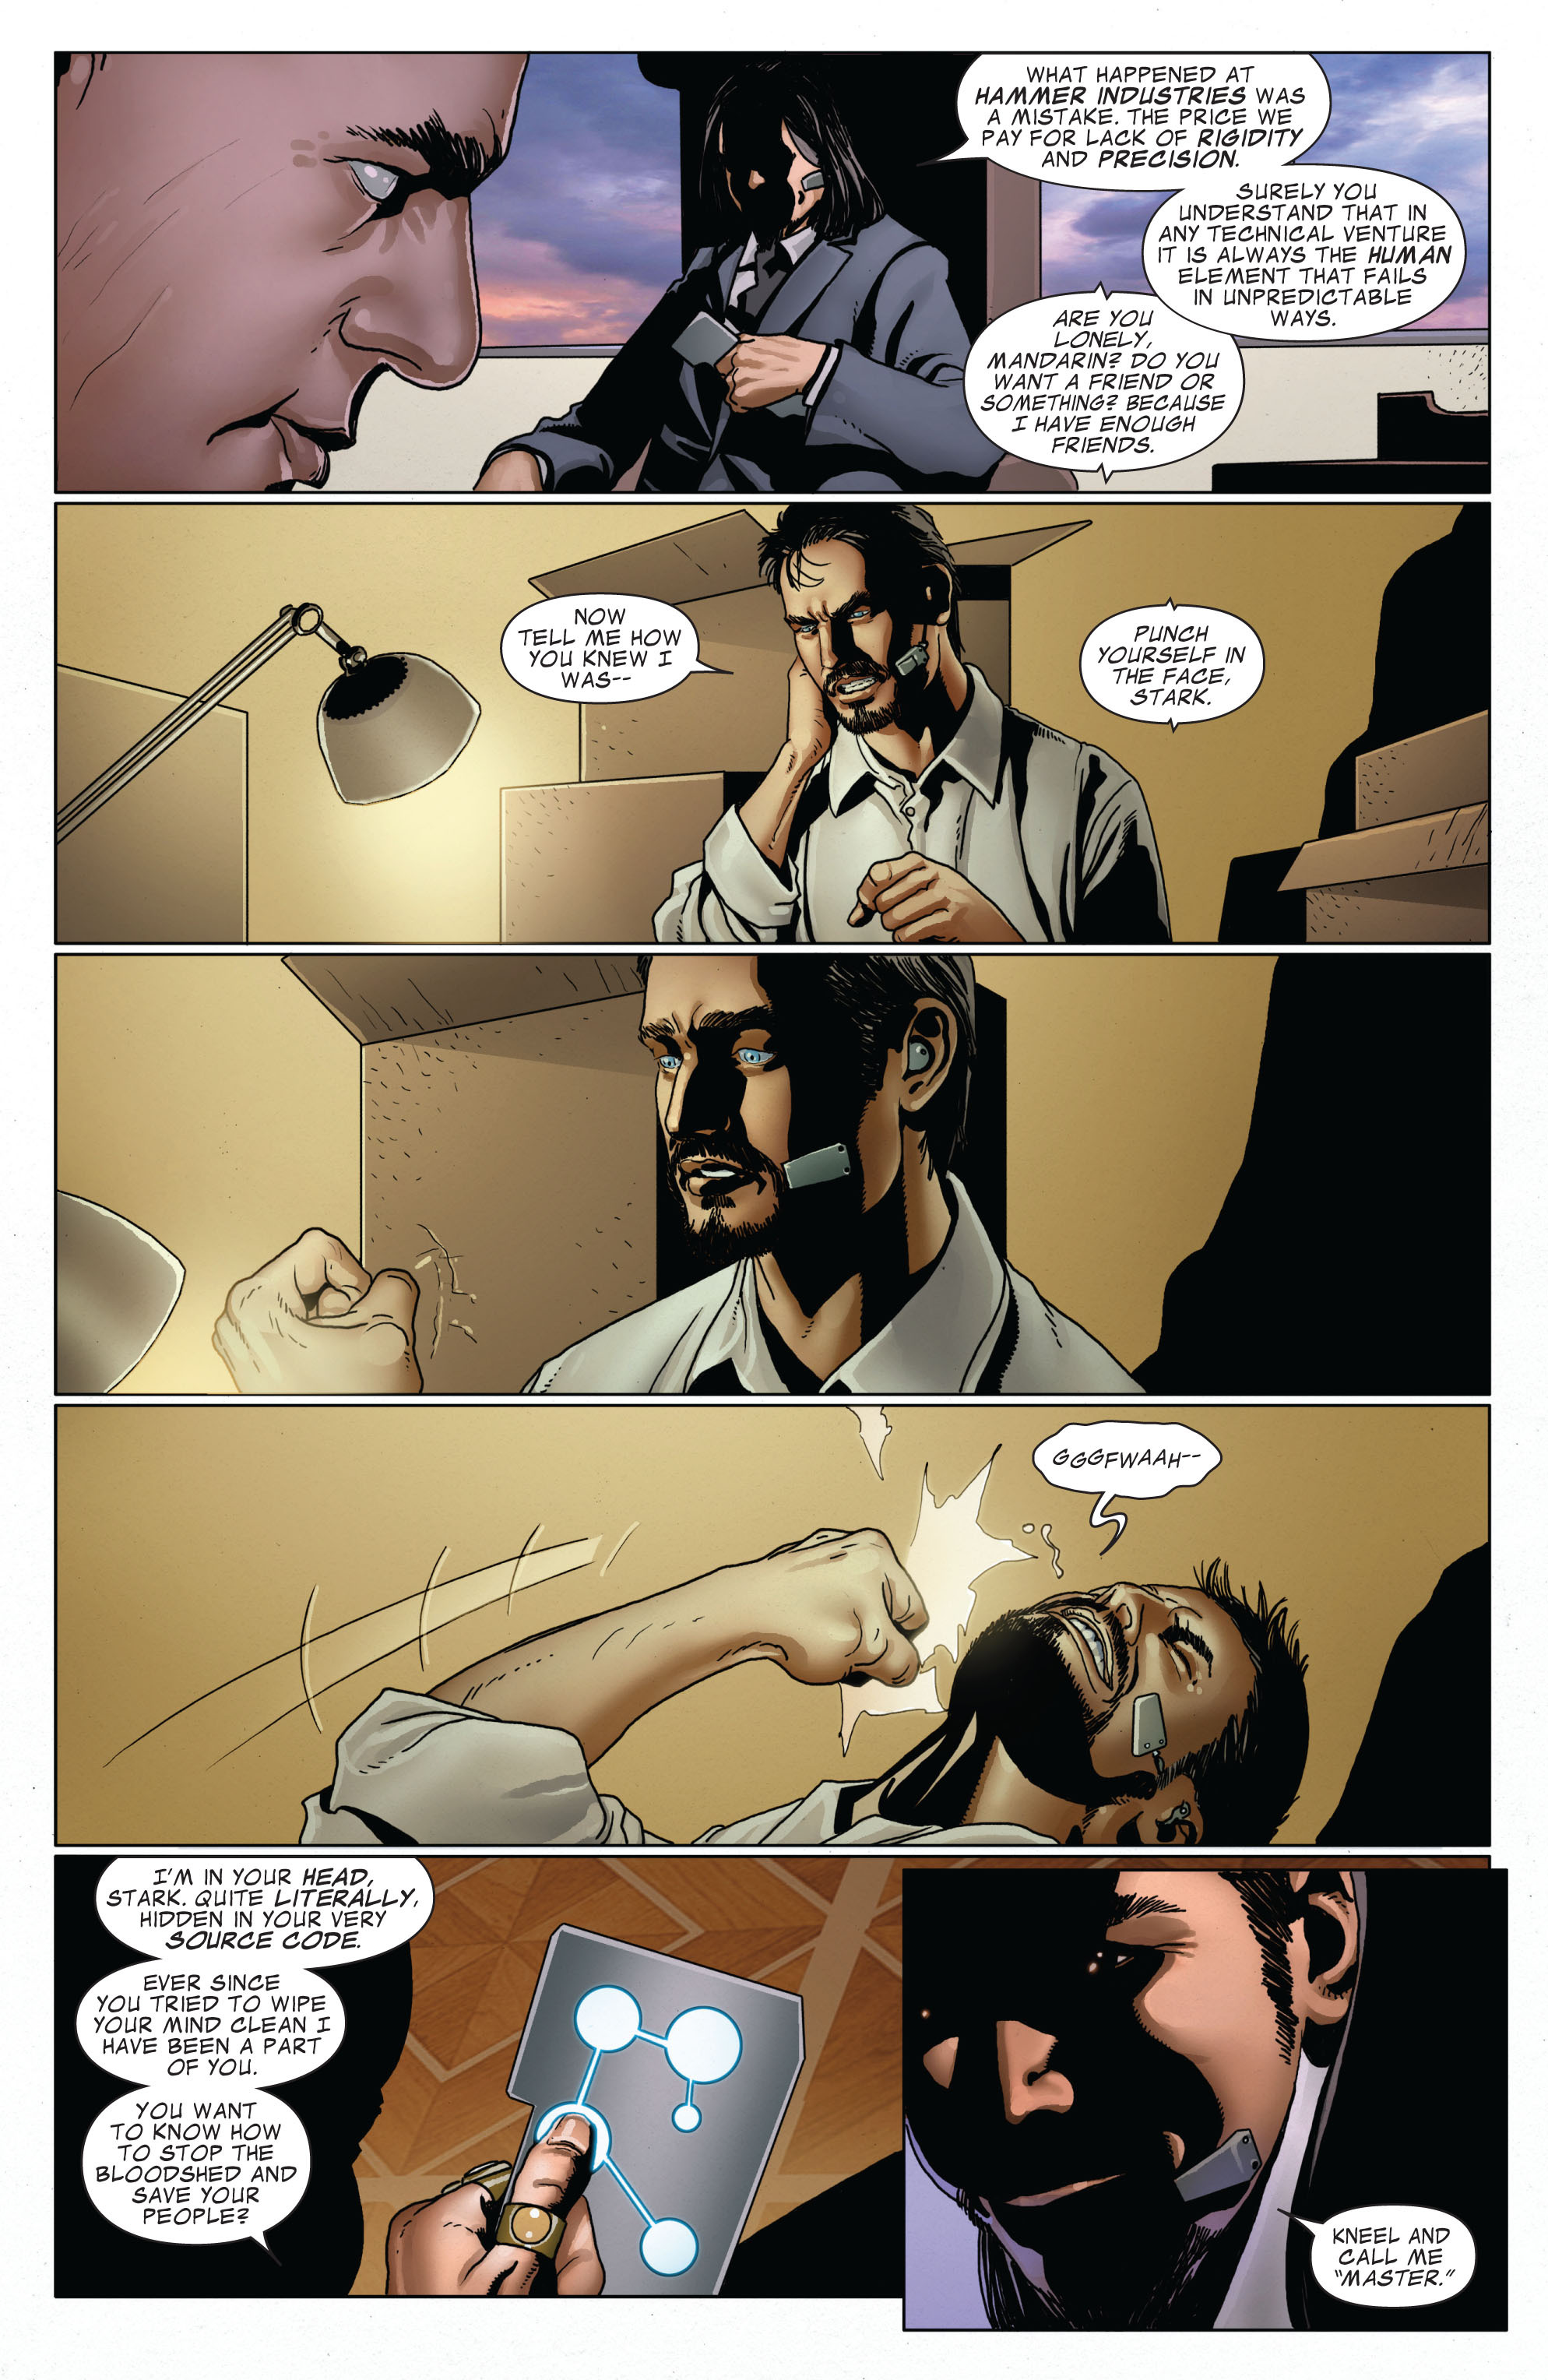 Invincible Iron Man (2008) 520 Page 20